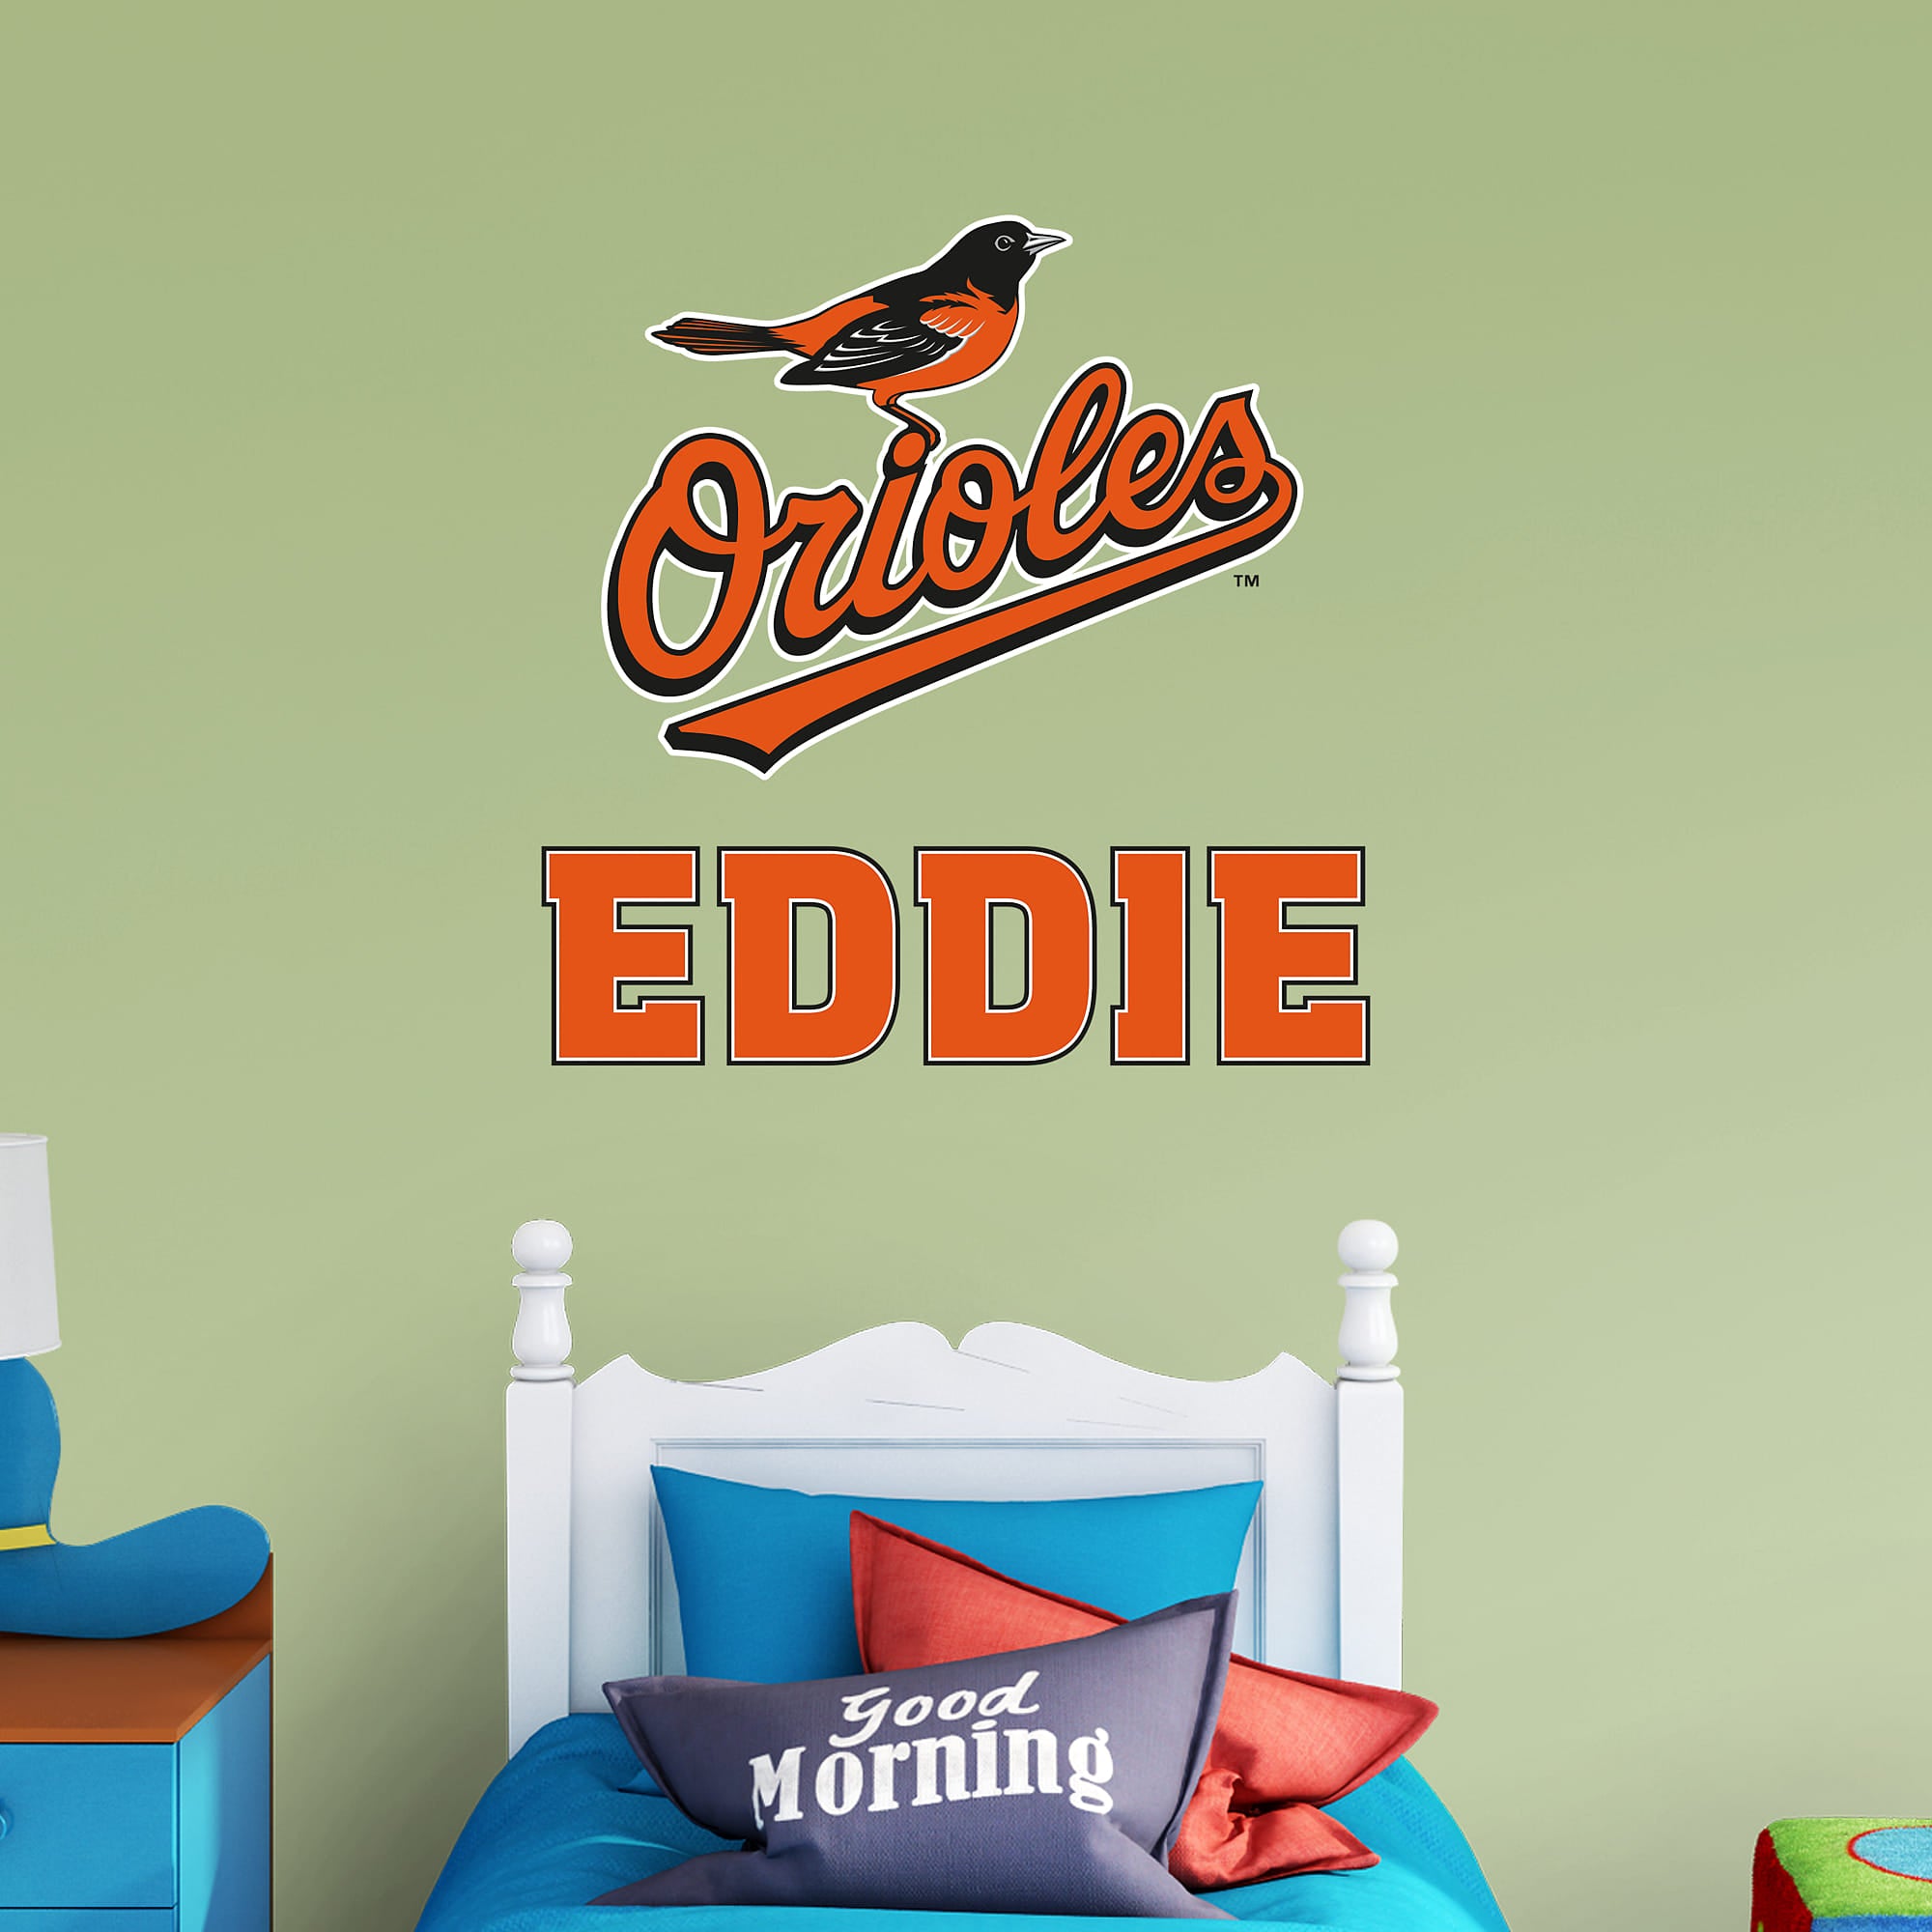 Baltimore Orioles: Stacked Personalized Name - Officially Licensed MLB Transfer Decal in Orange (52"W x 39.5"H) by Fathead | Vin